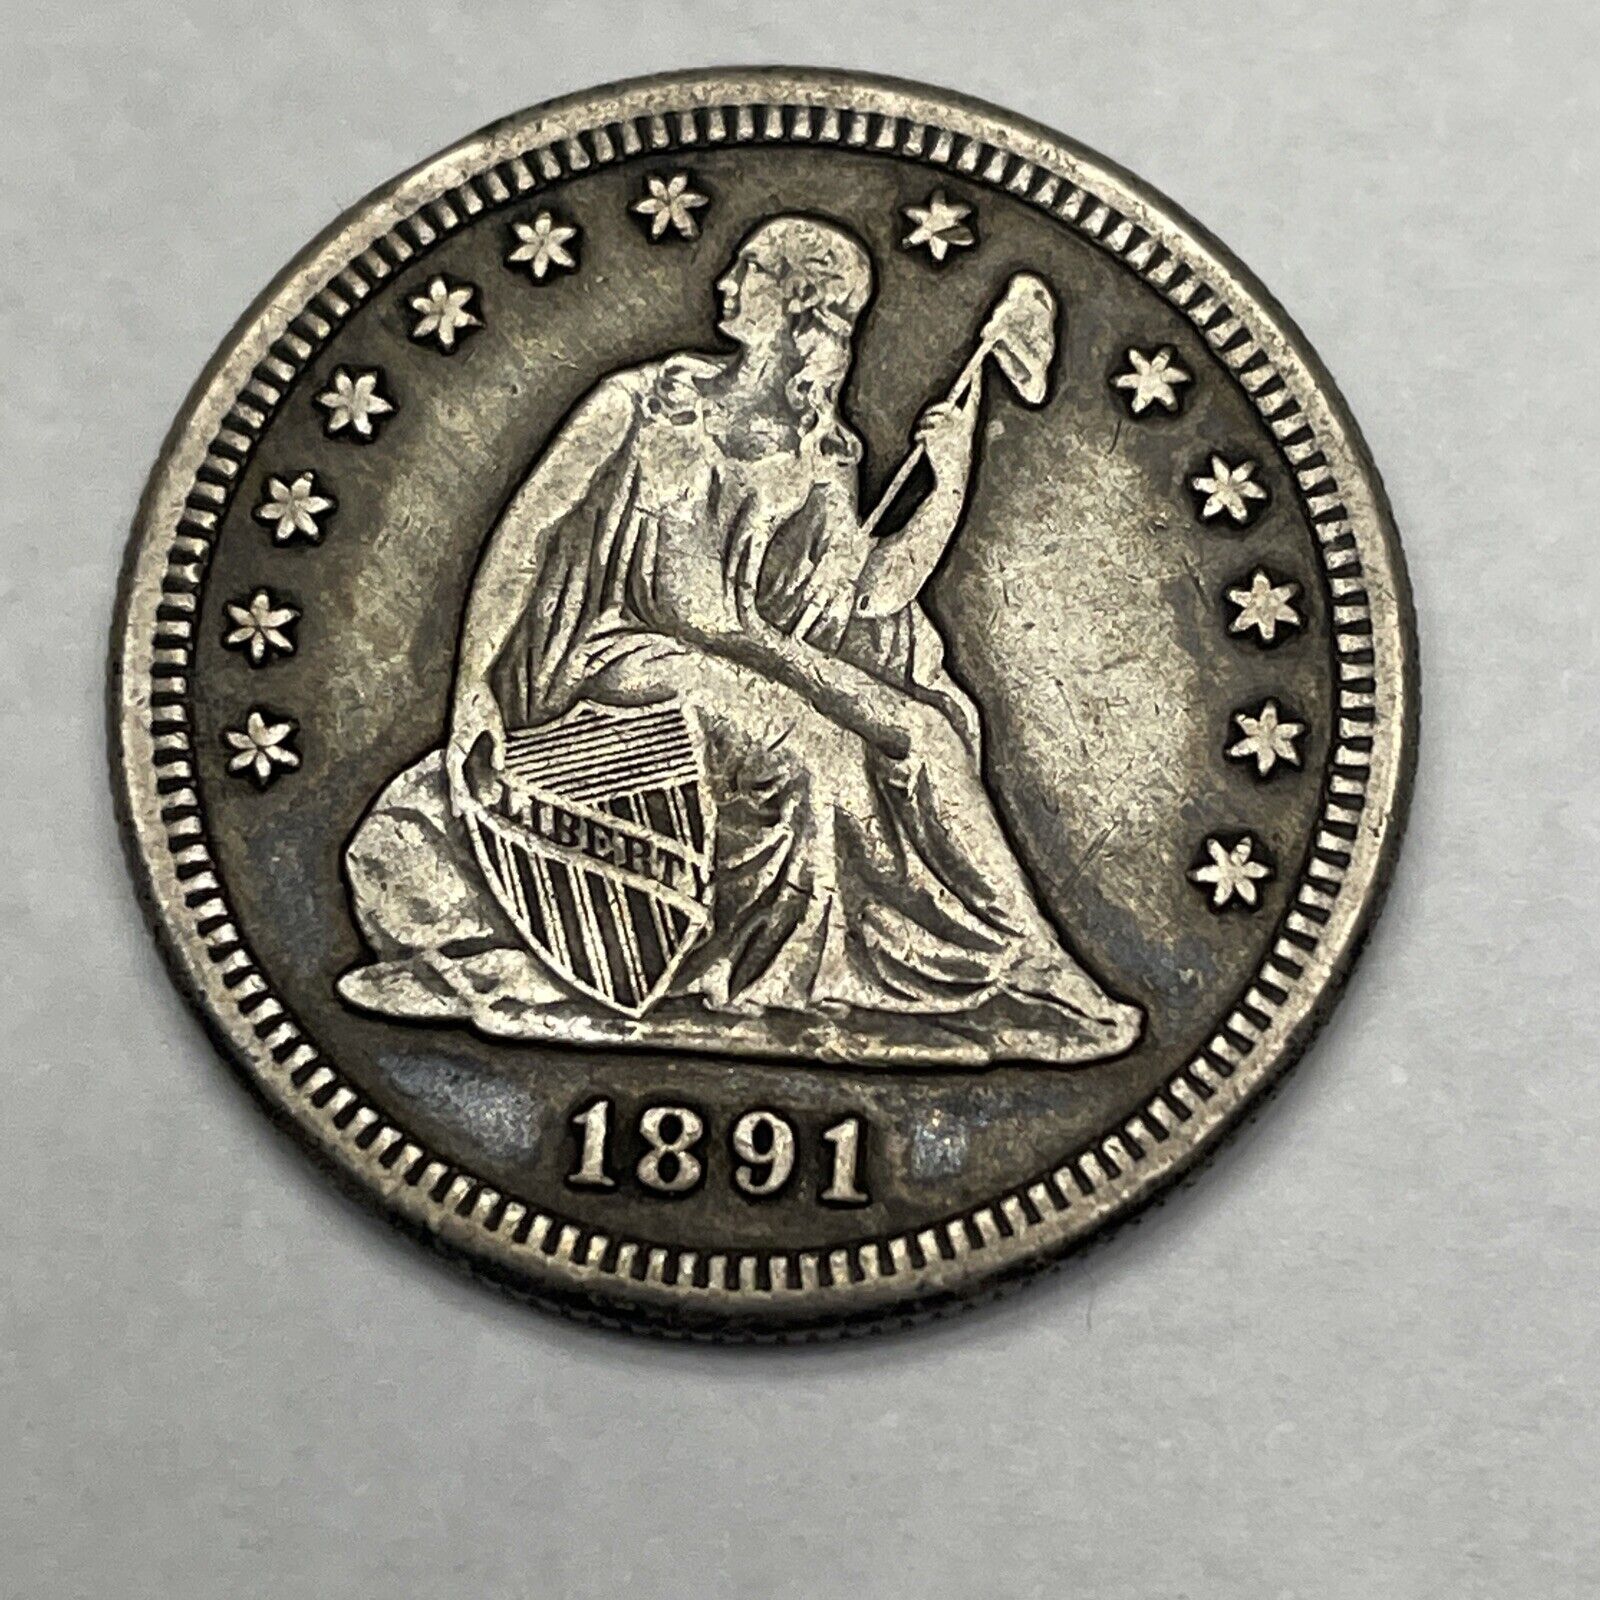 1891 s choice extra fine seated liberty silver quarter great collector piece